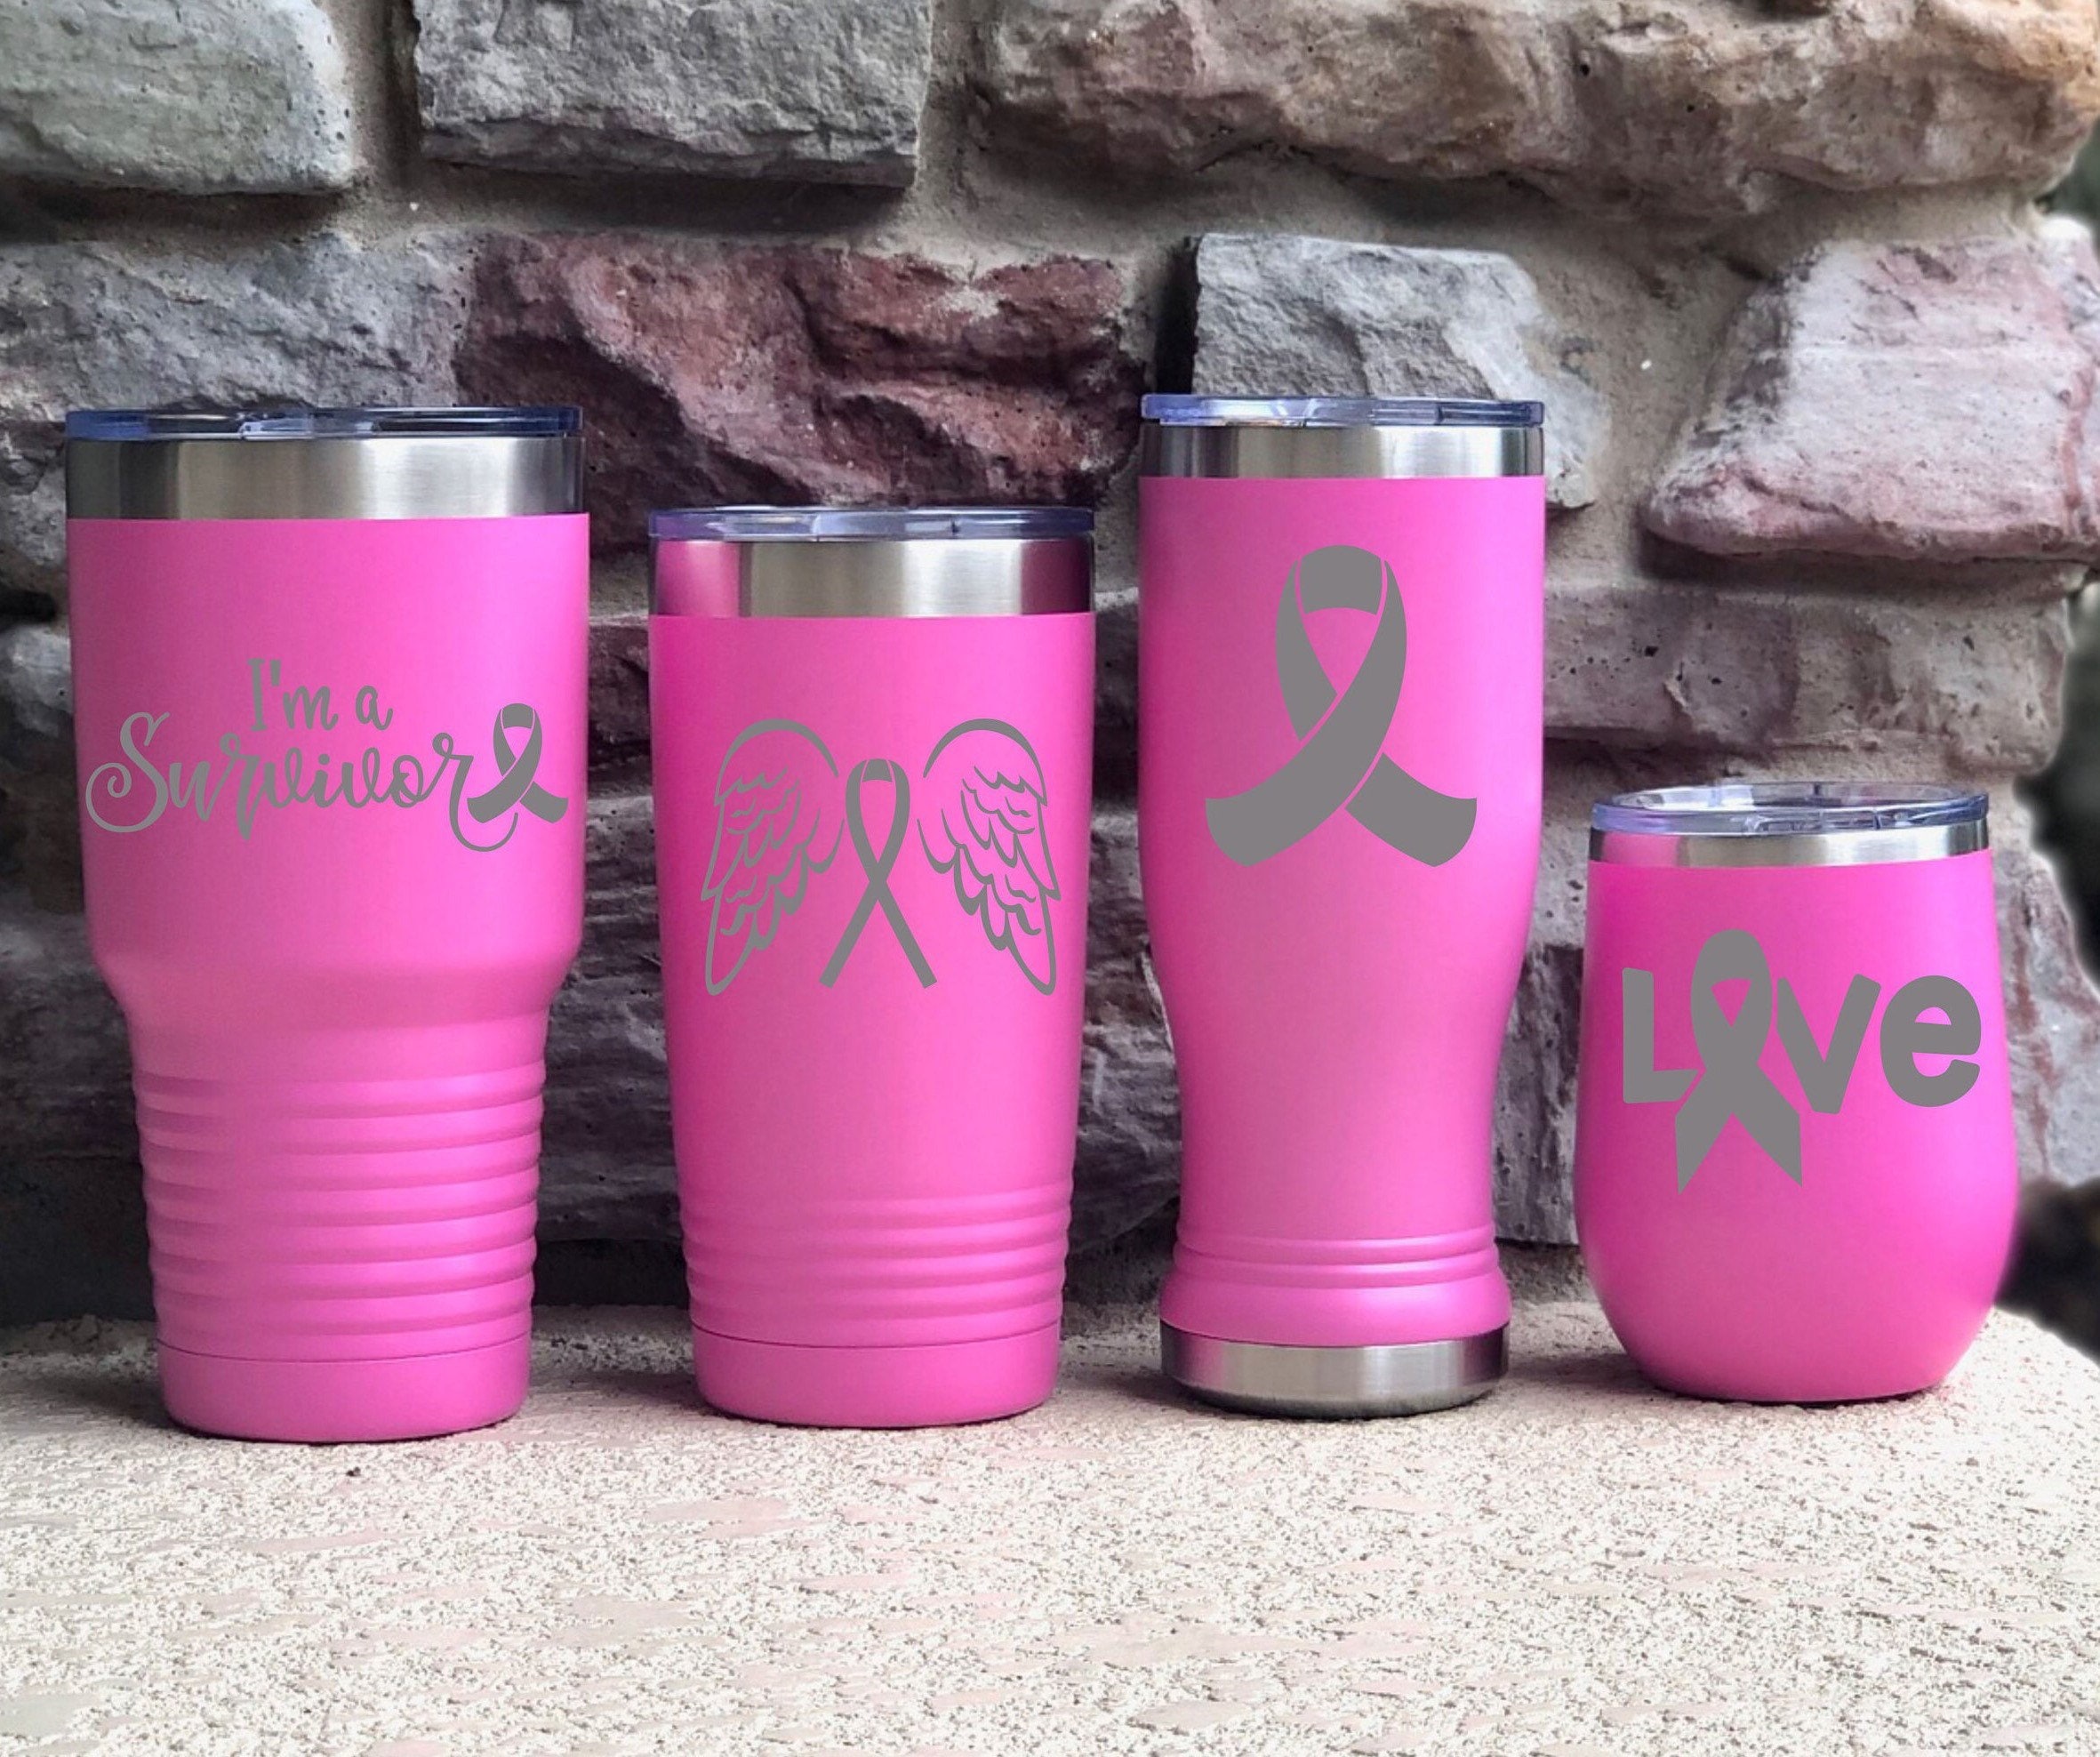 YETI's New Limited Edition Sandstone Collection Is In Honor Of Breast  Cancer Awareness Month